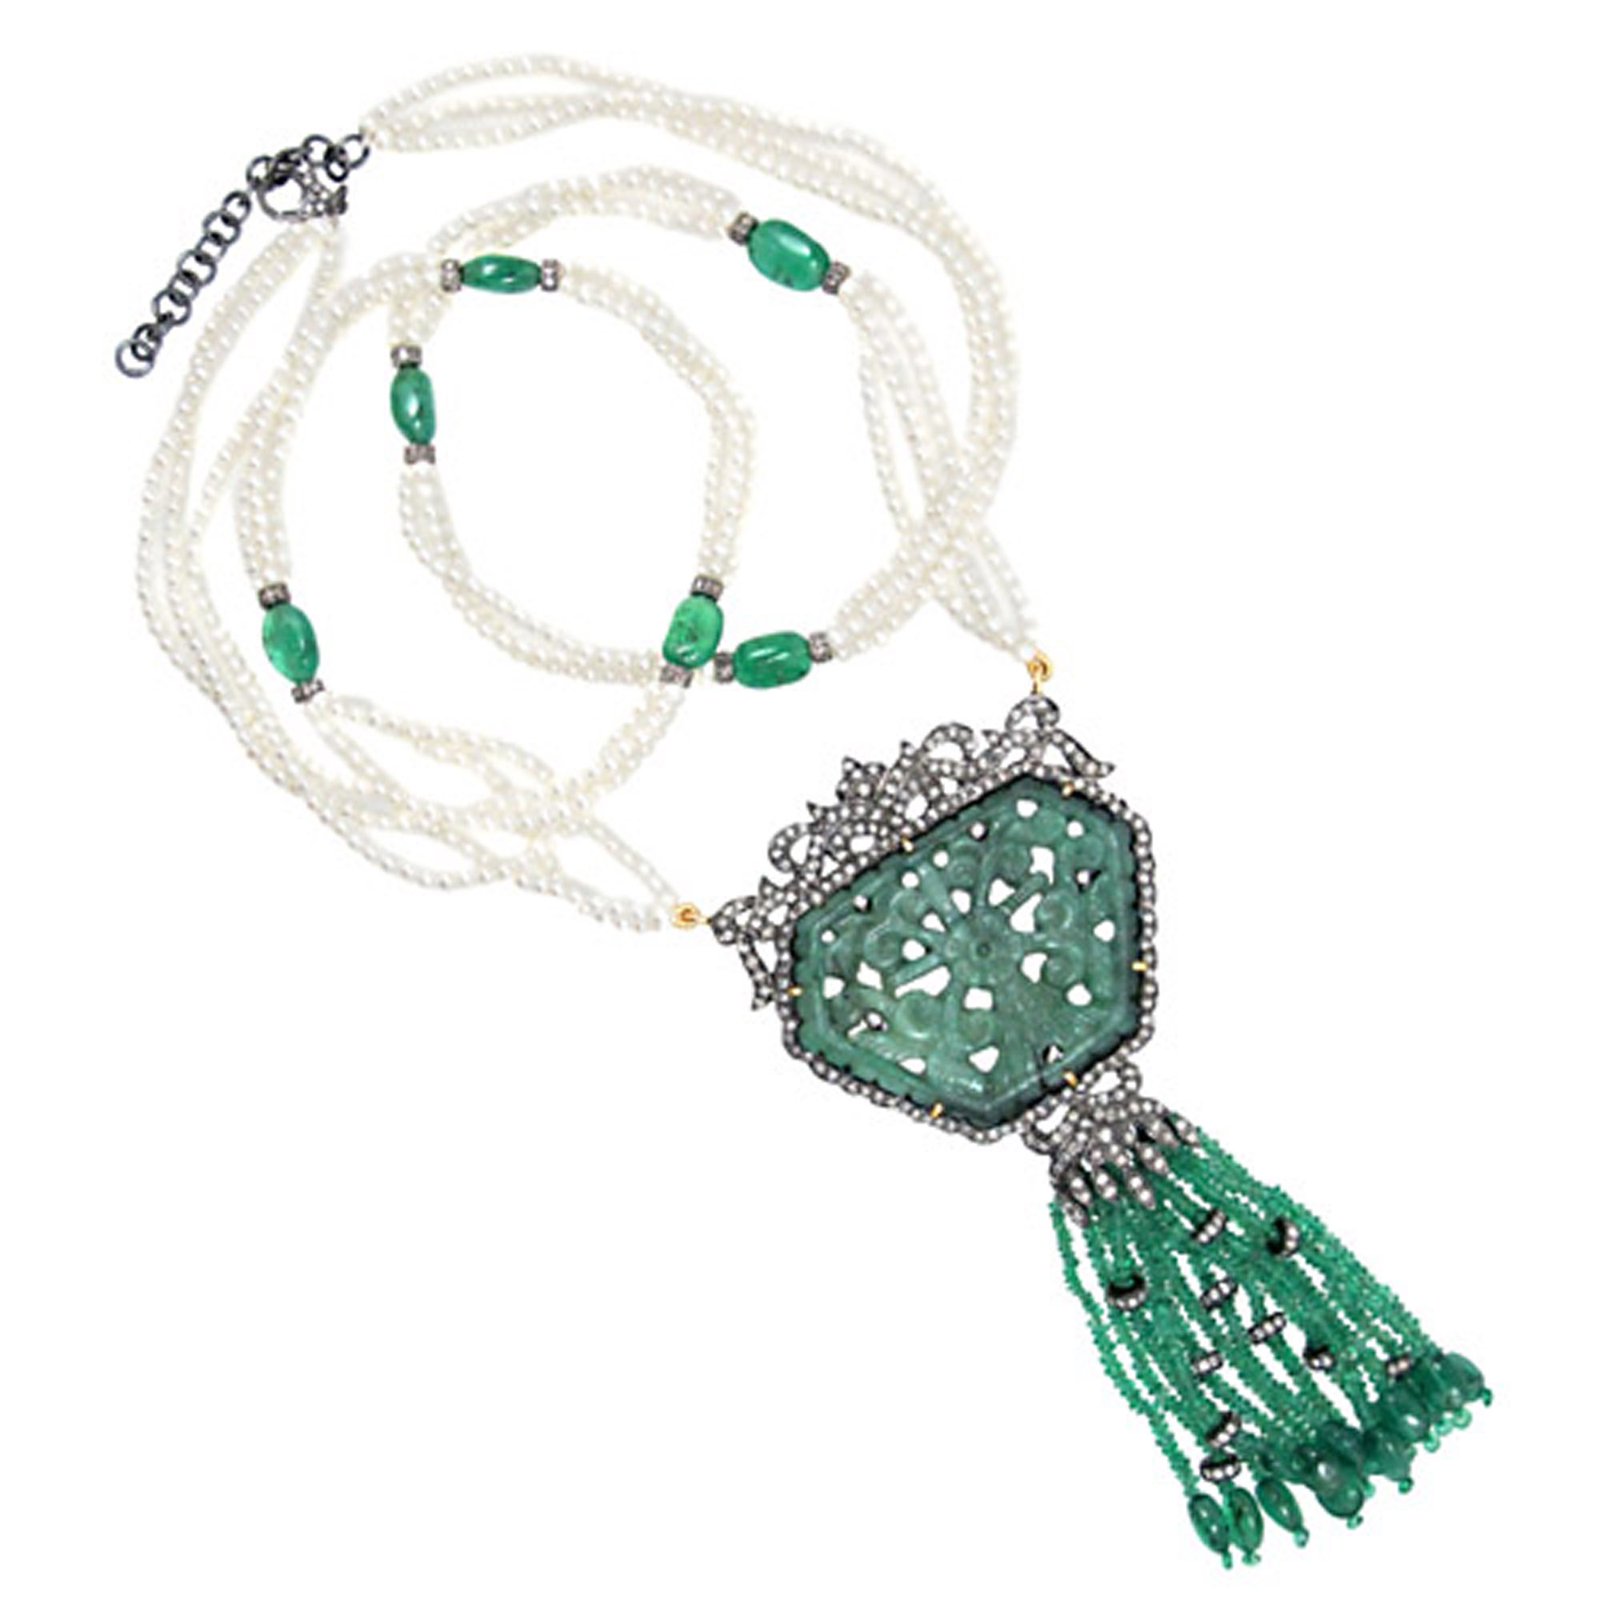 Emerald carving pendant pearl tassel necklace